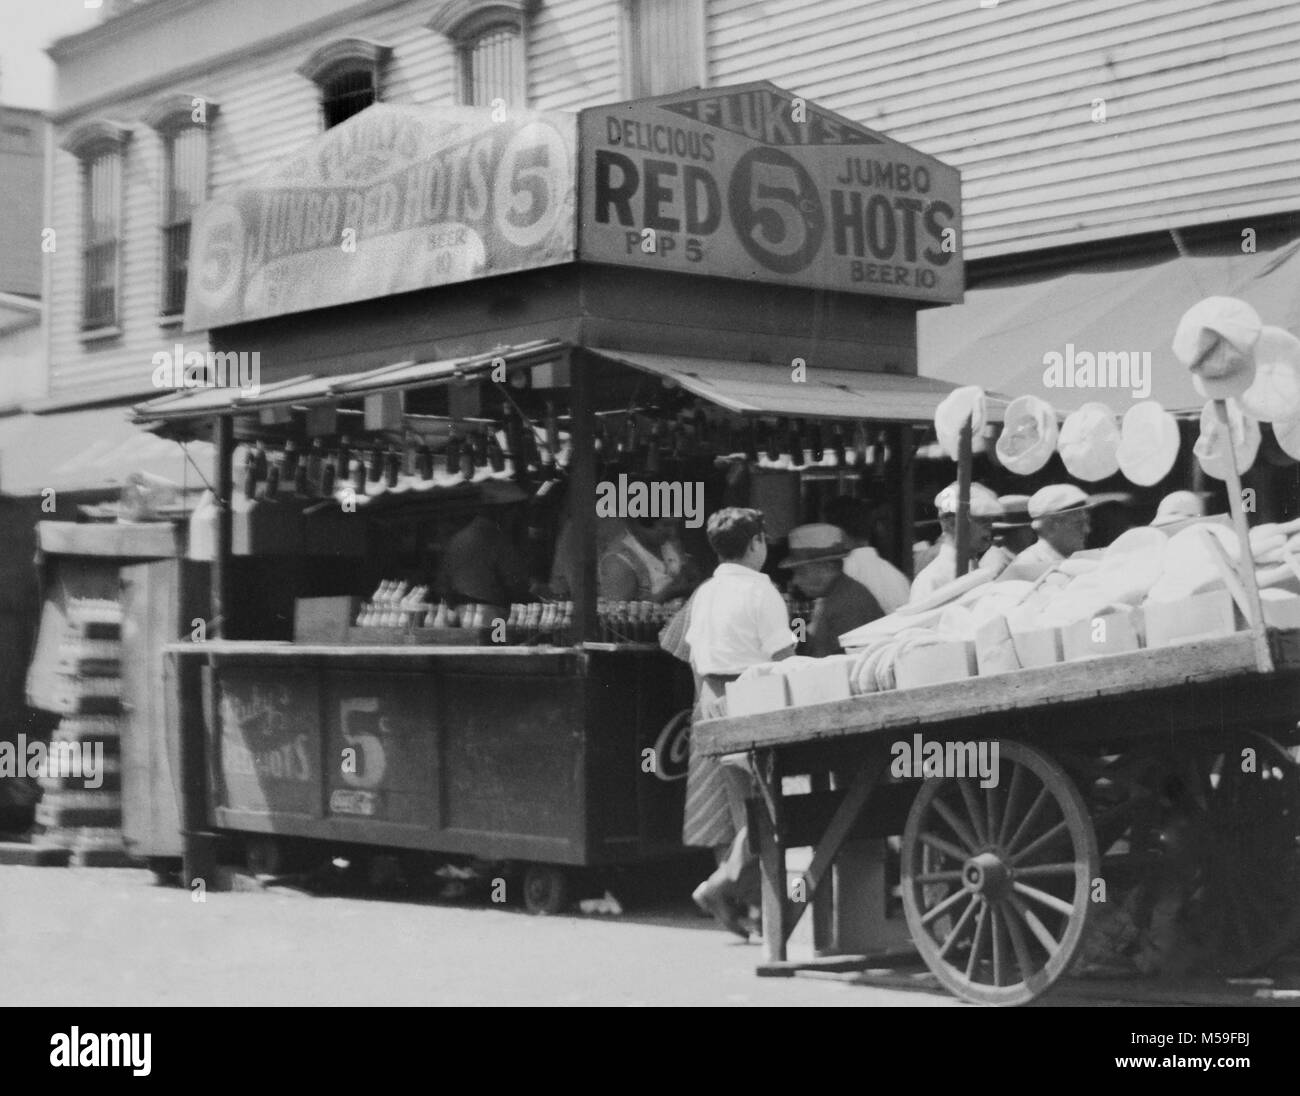 Fluky's Red Hots original Hot Dog stand auf Maxwell Str. in Chicago. Ca. 1929. Stockfoto